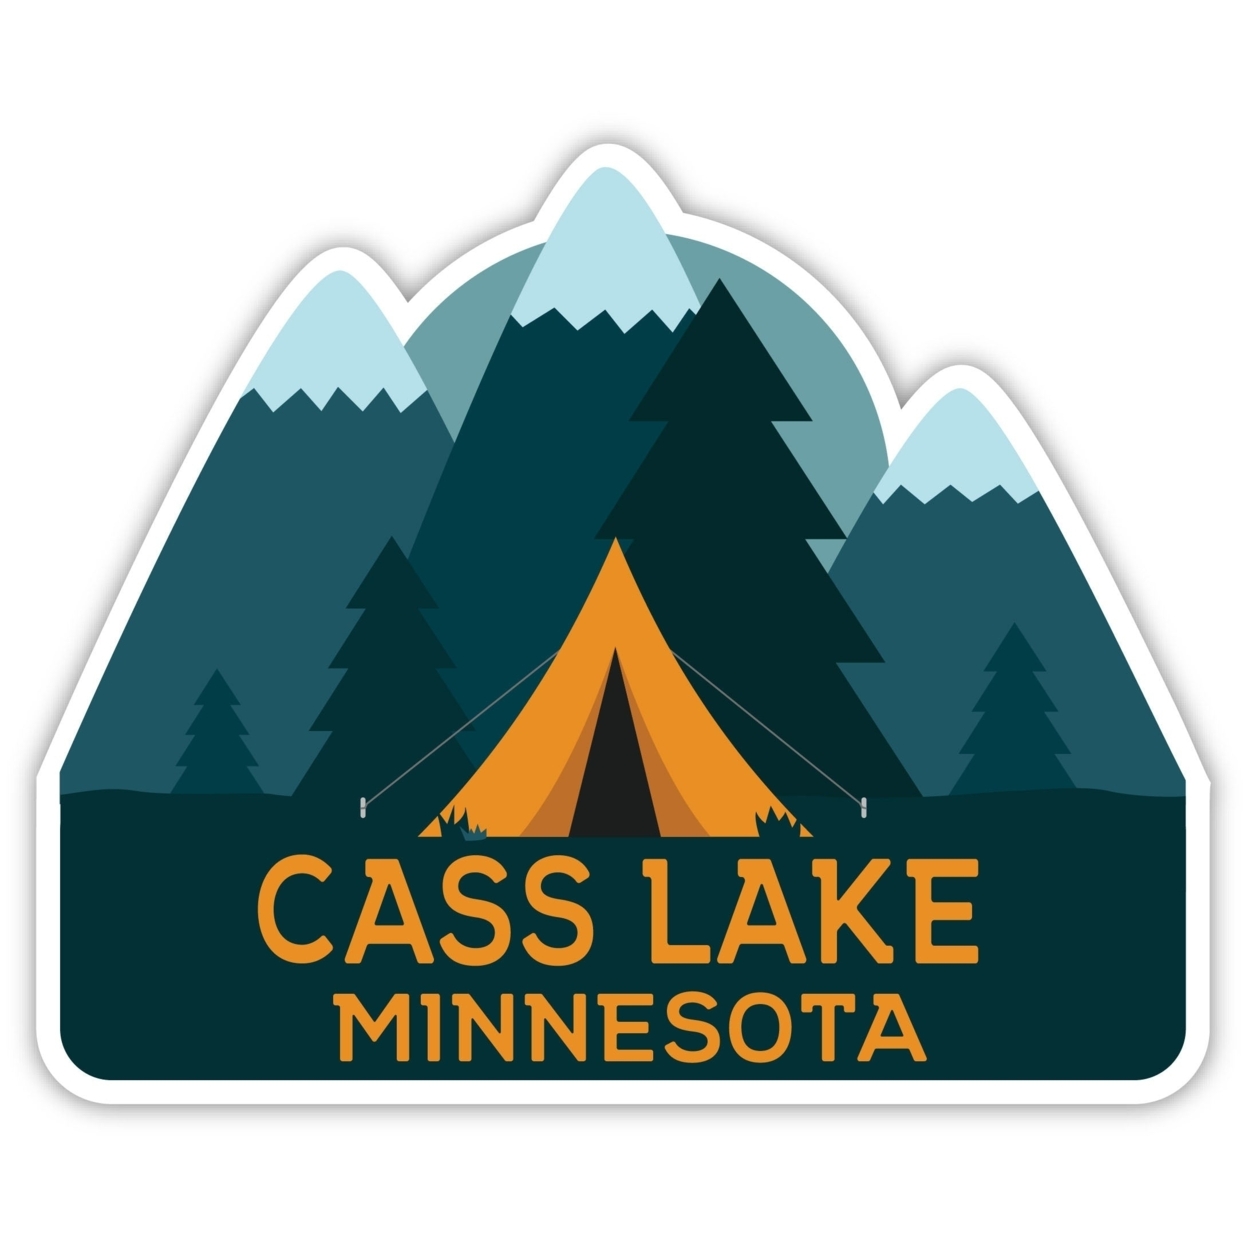 Cass Lake Minnesota Souvenir Decorative Stickers (Choose Theme And Size) - 4-Pack, 8-Inch, Tent